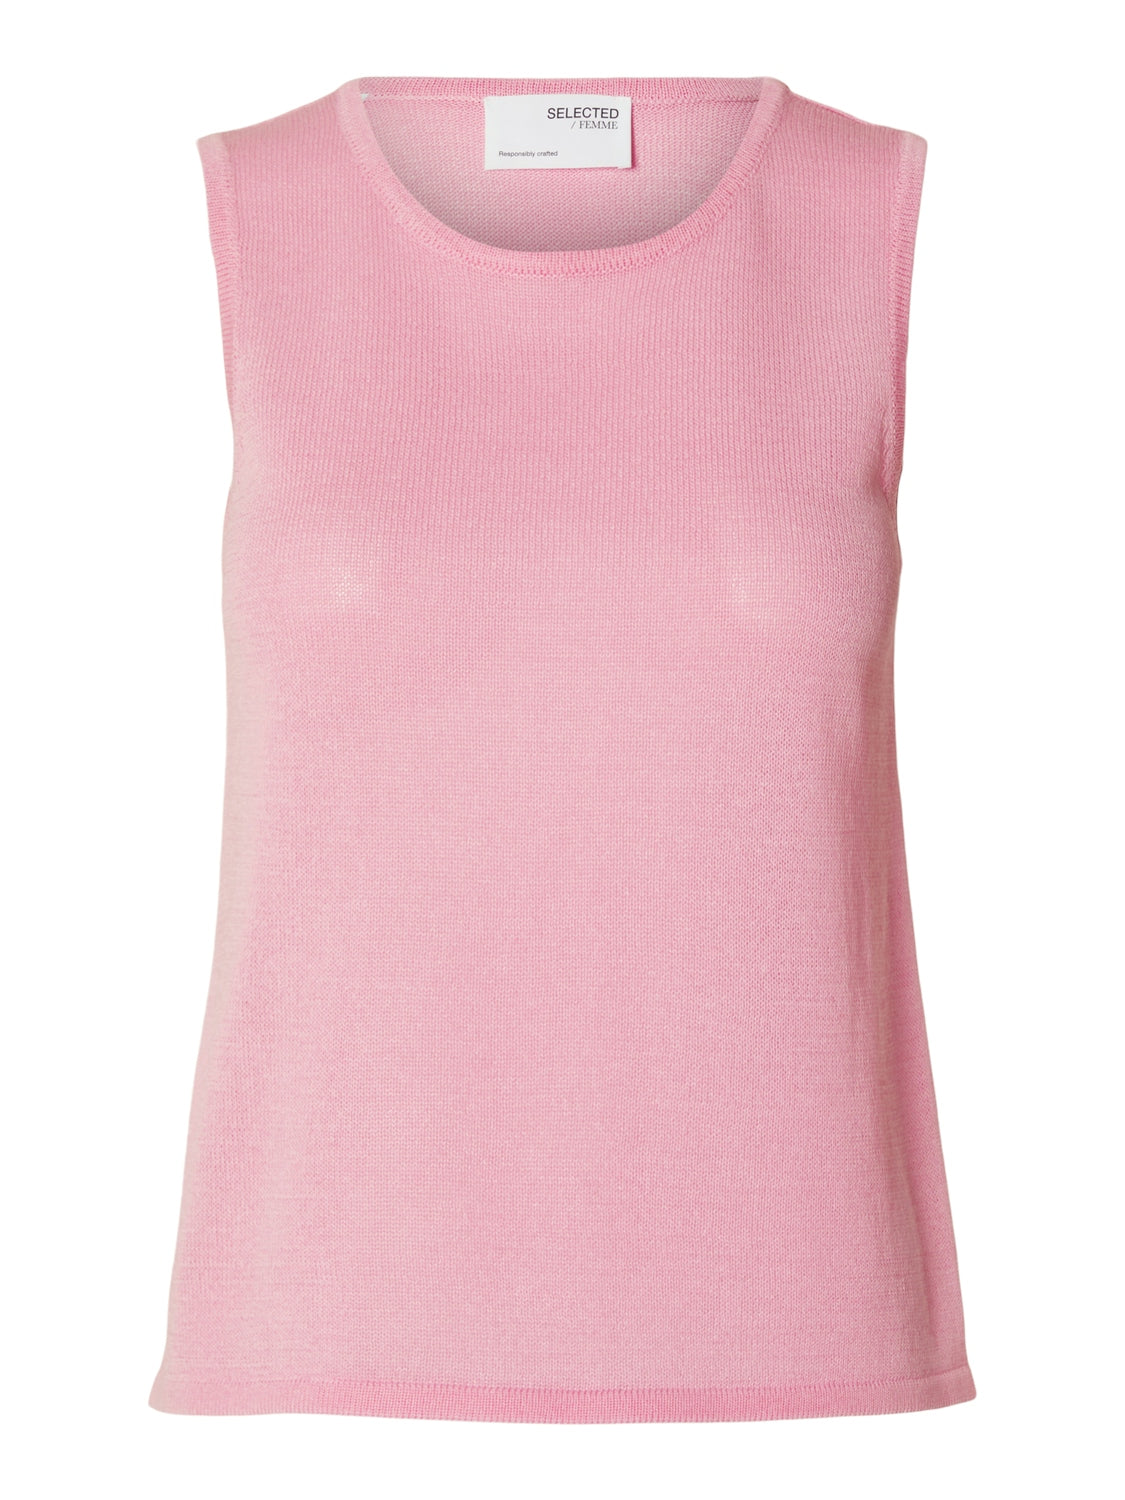 Selected Femme " Moon" Knit Top pink